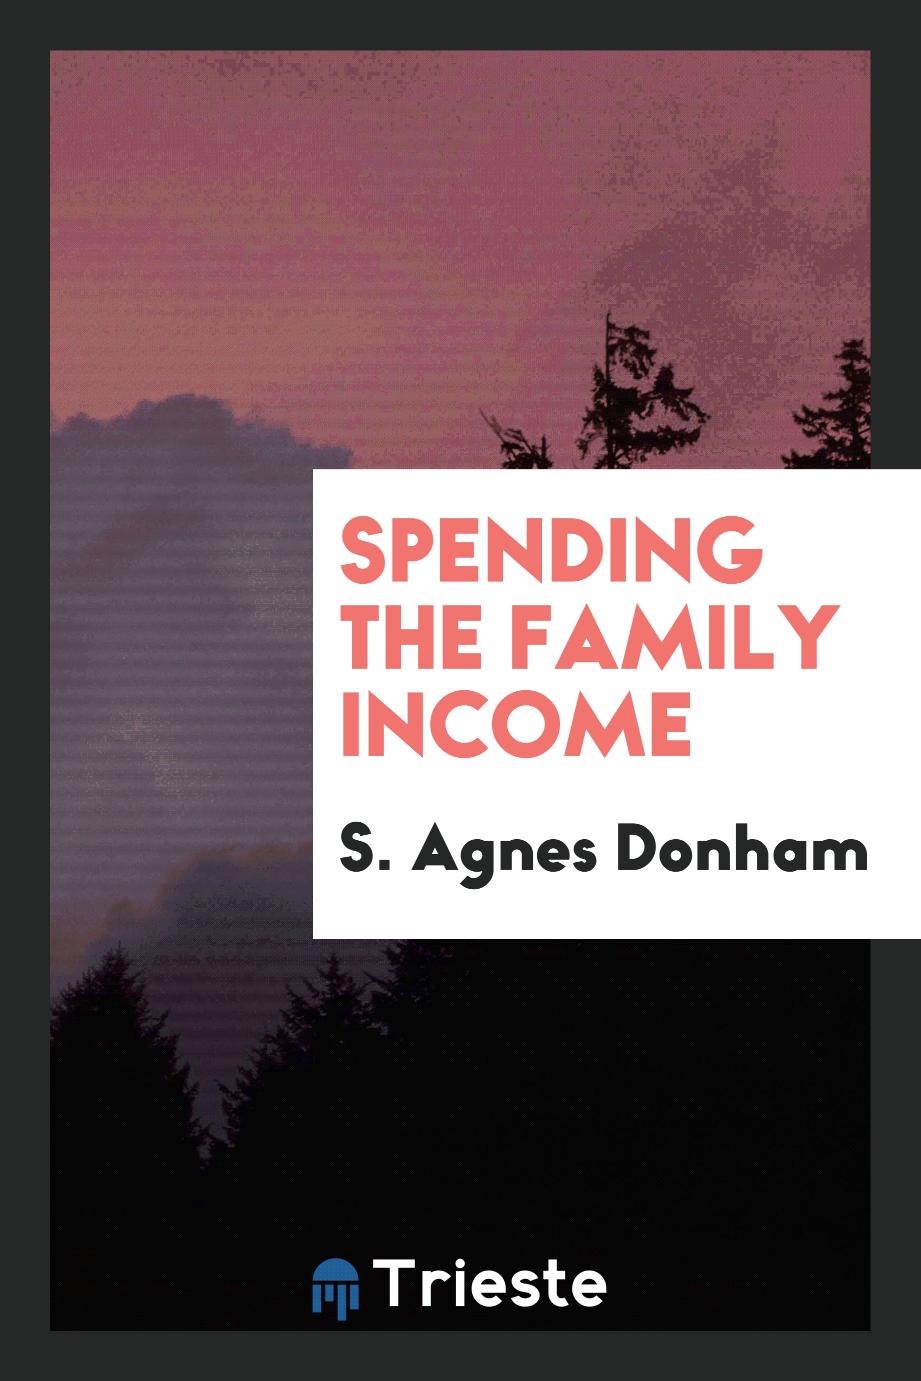 Spending the Family Income